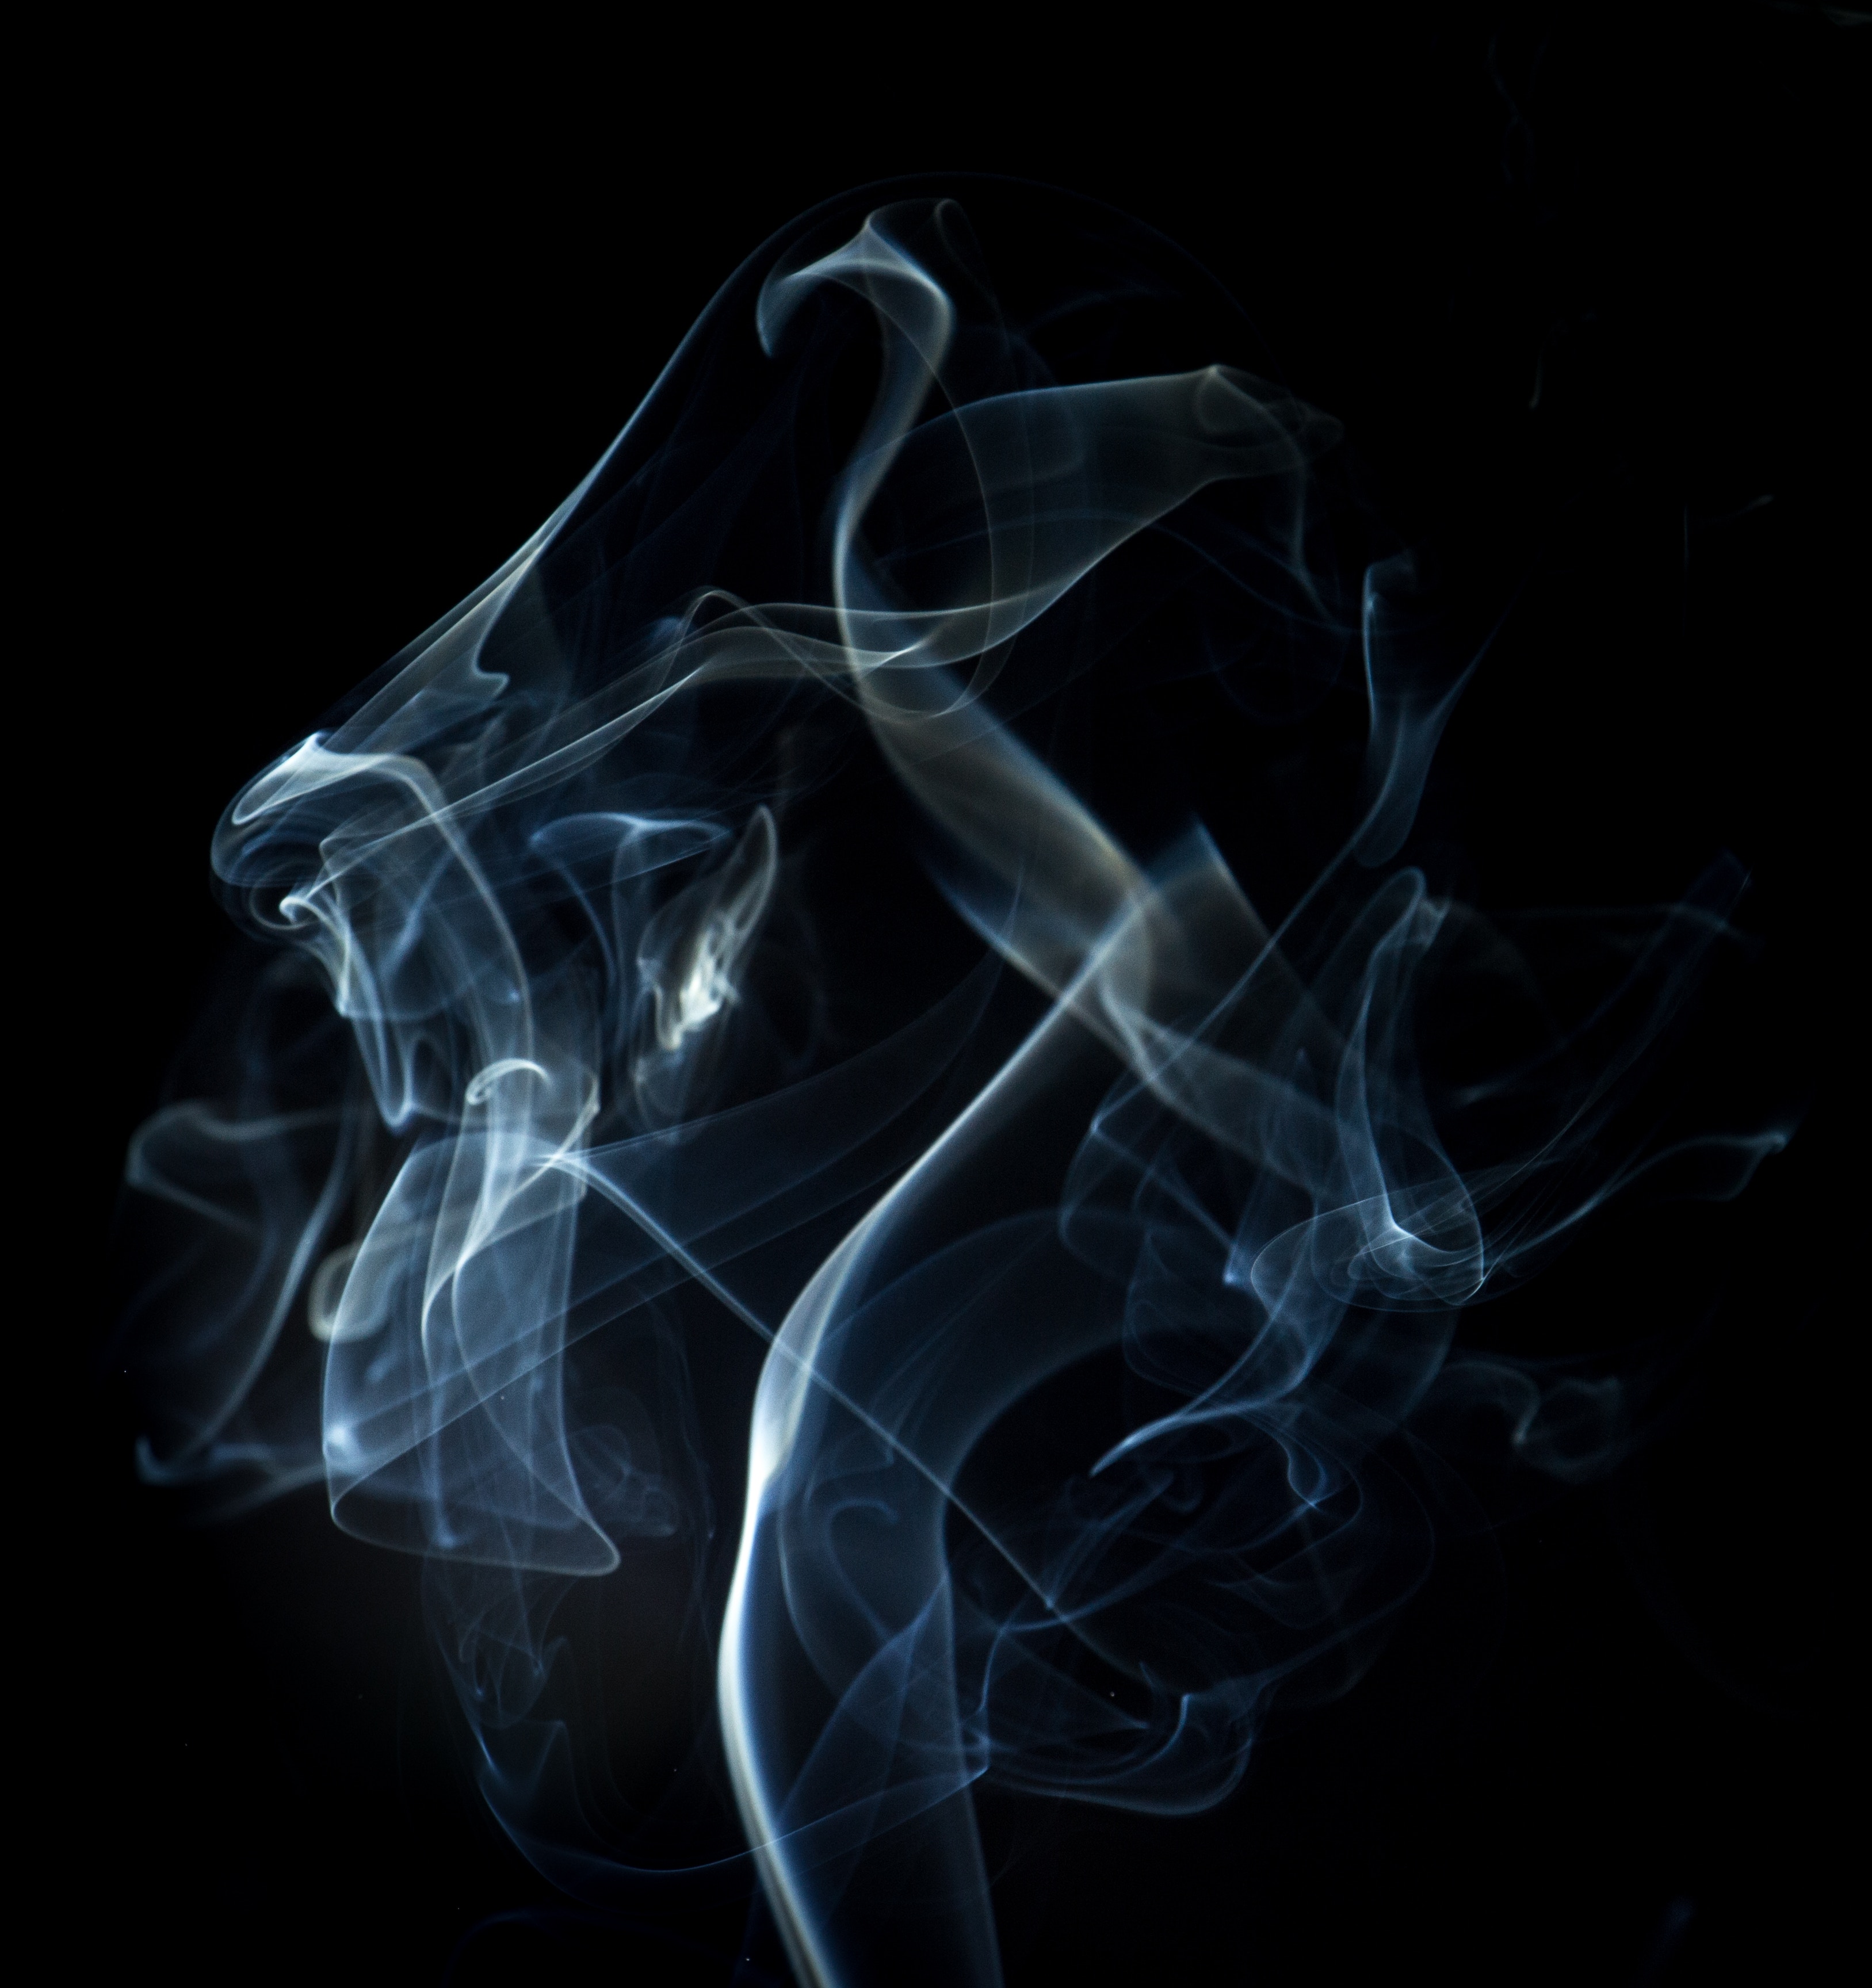 119312 download wallpaper lines, abstract, smoke, dark background, shroud screensavers and pictures for free